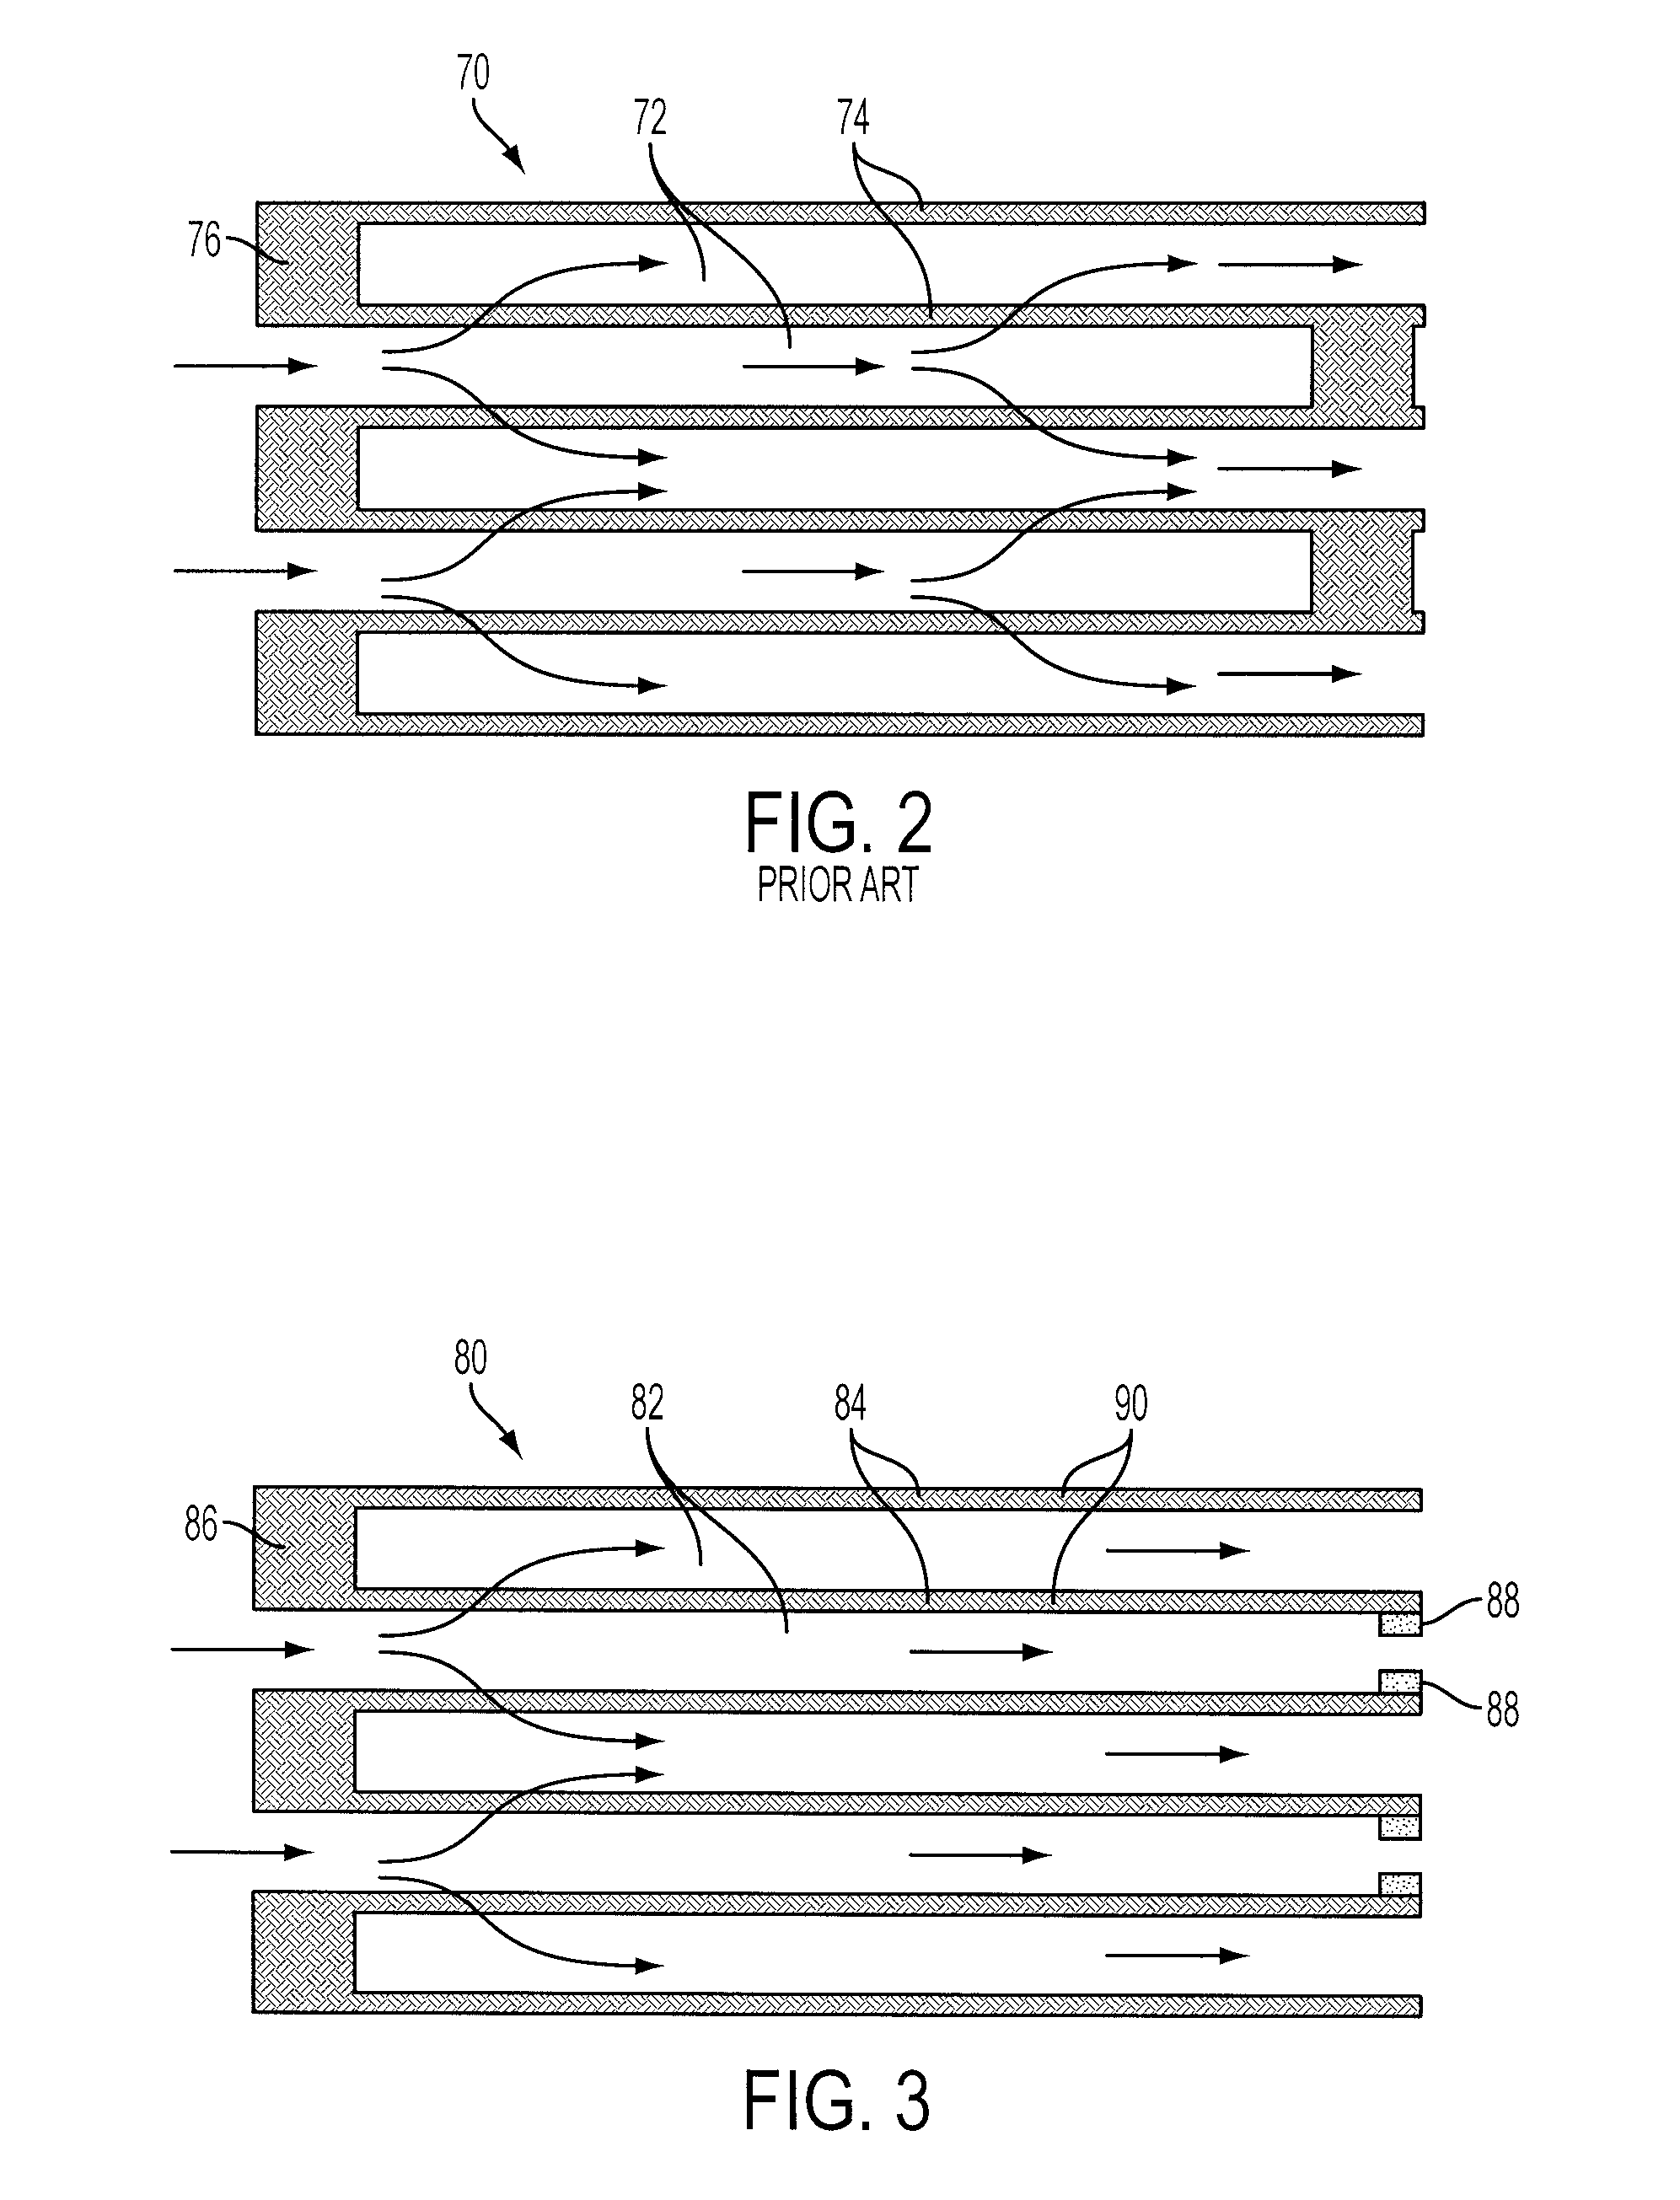 Exhaust Treatment device Facilitating Through-Wall Flow